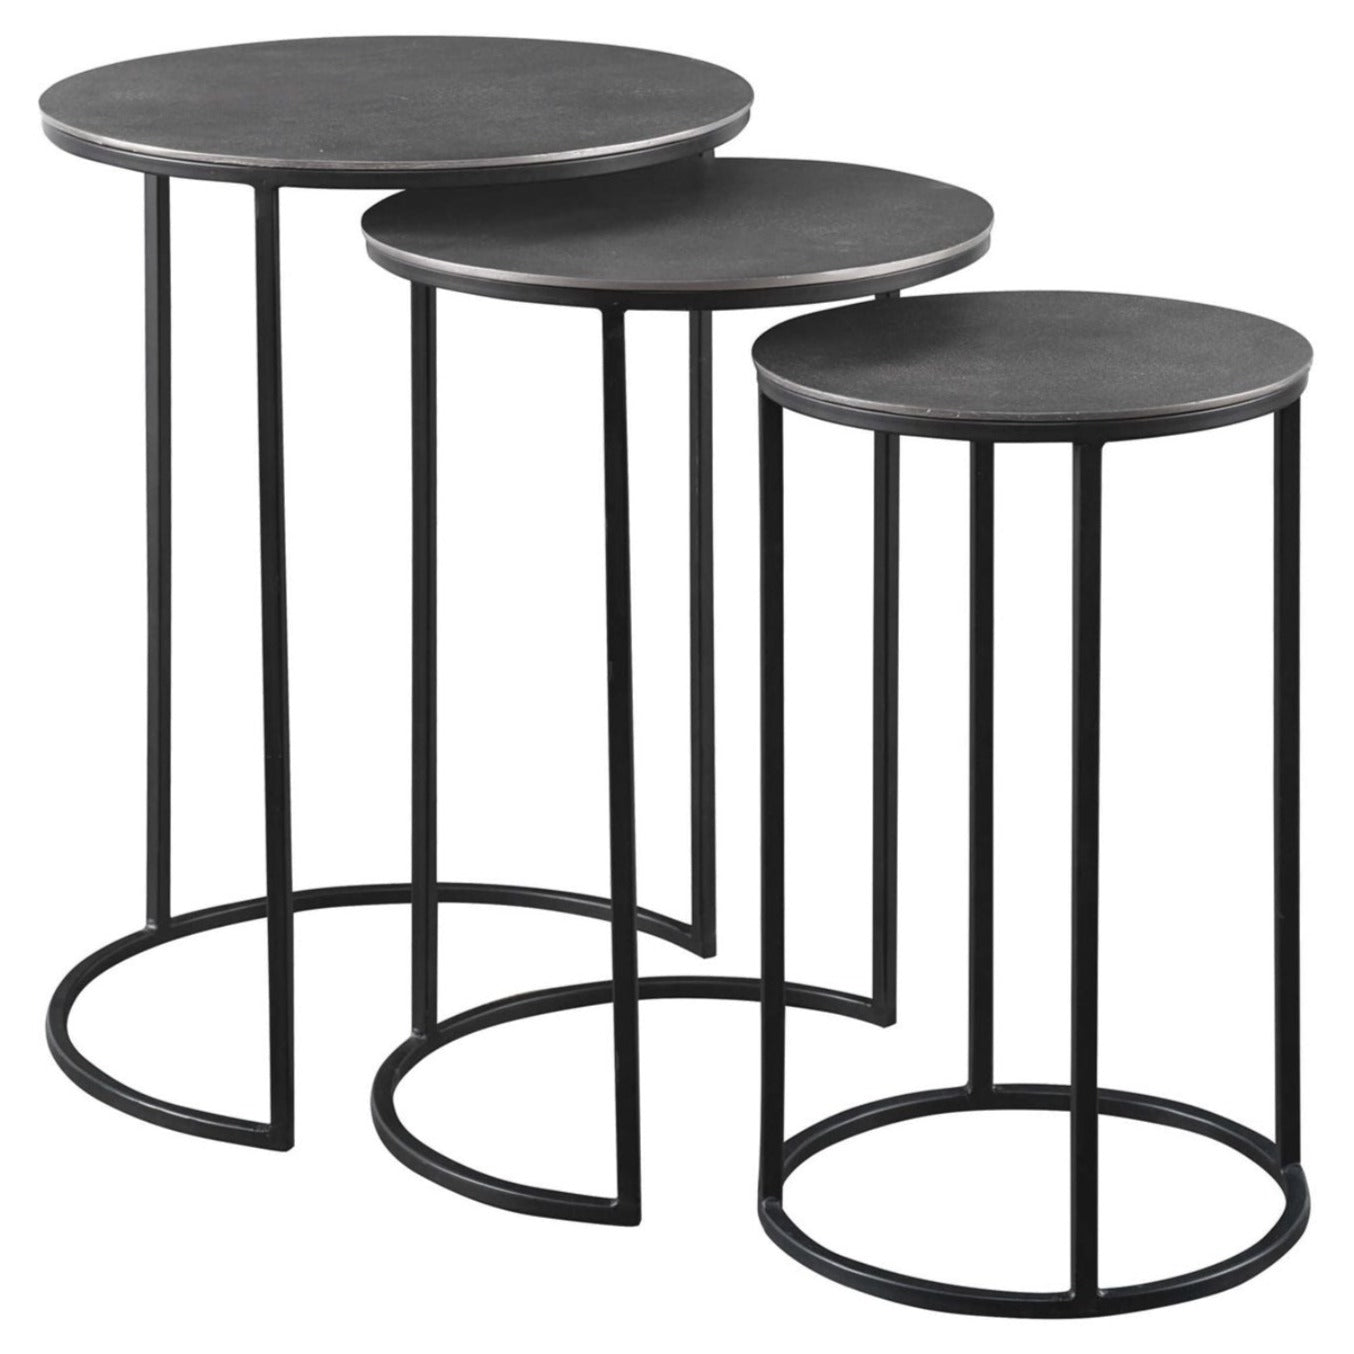 Set of three functional nesting tables constructed in an aged black iron, featuring a textured cast aluminum slab top finished in a plated antique nickel.